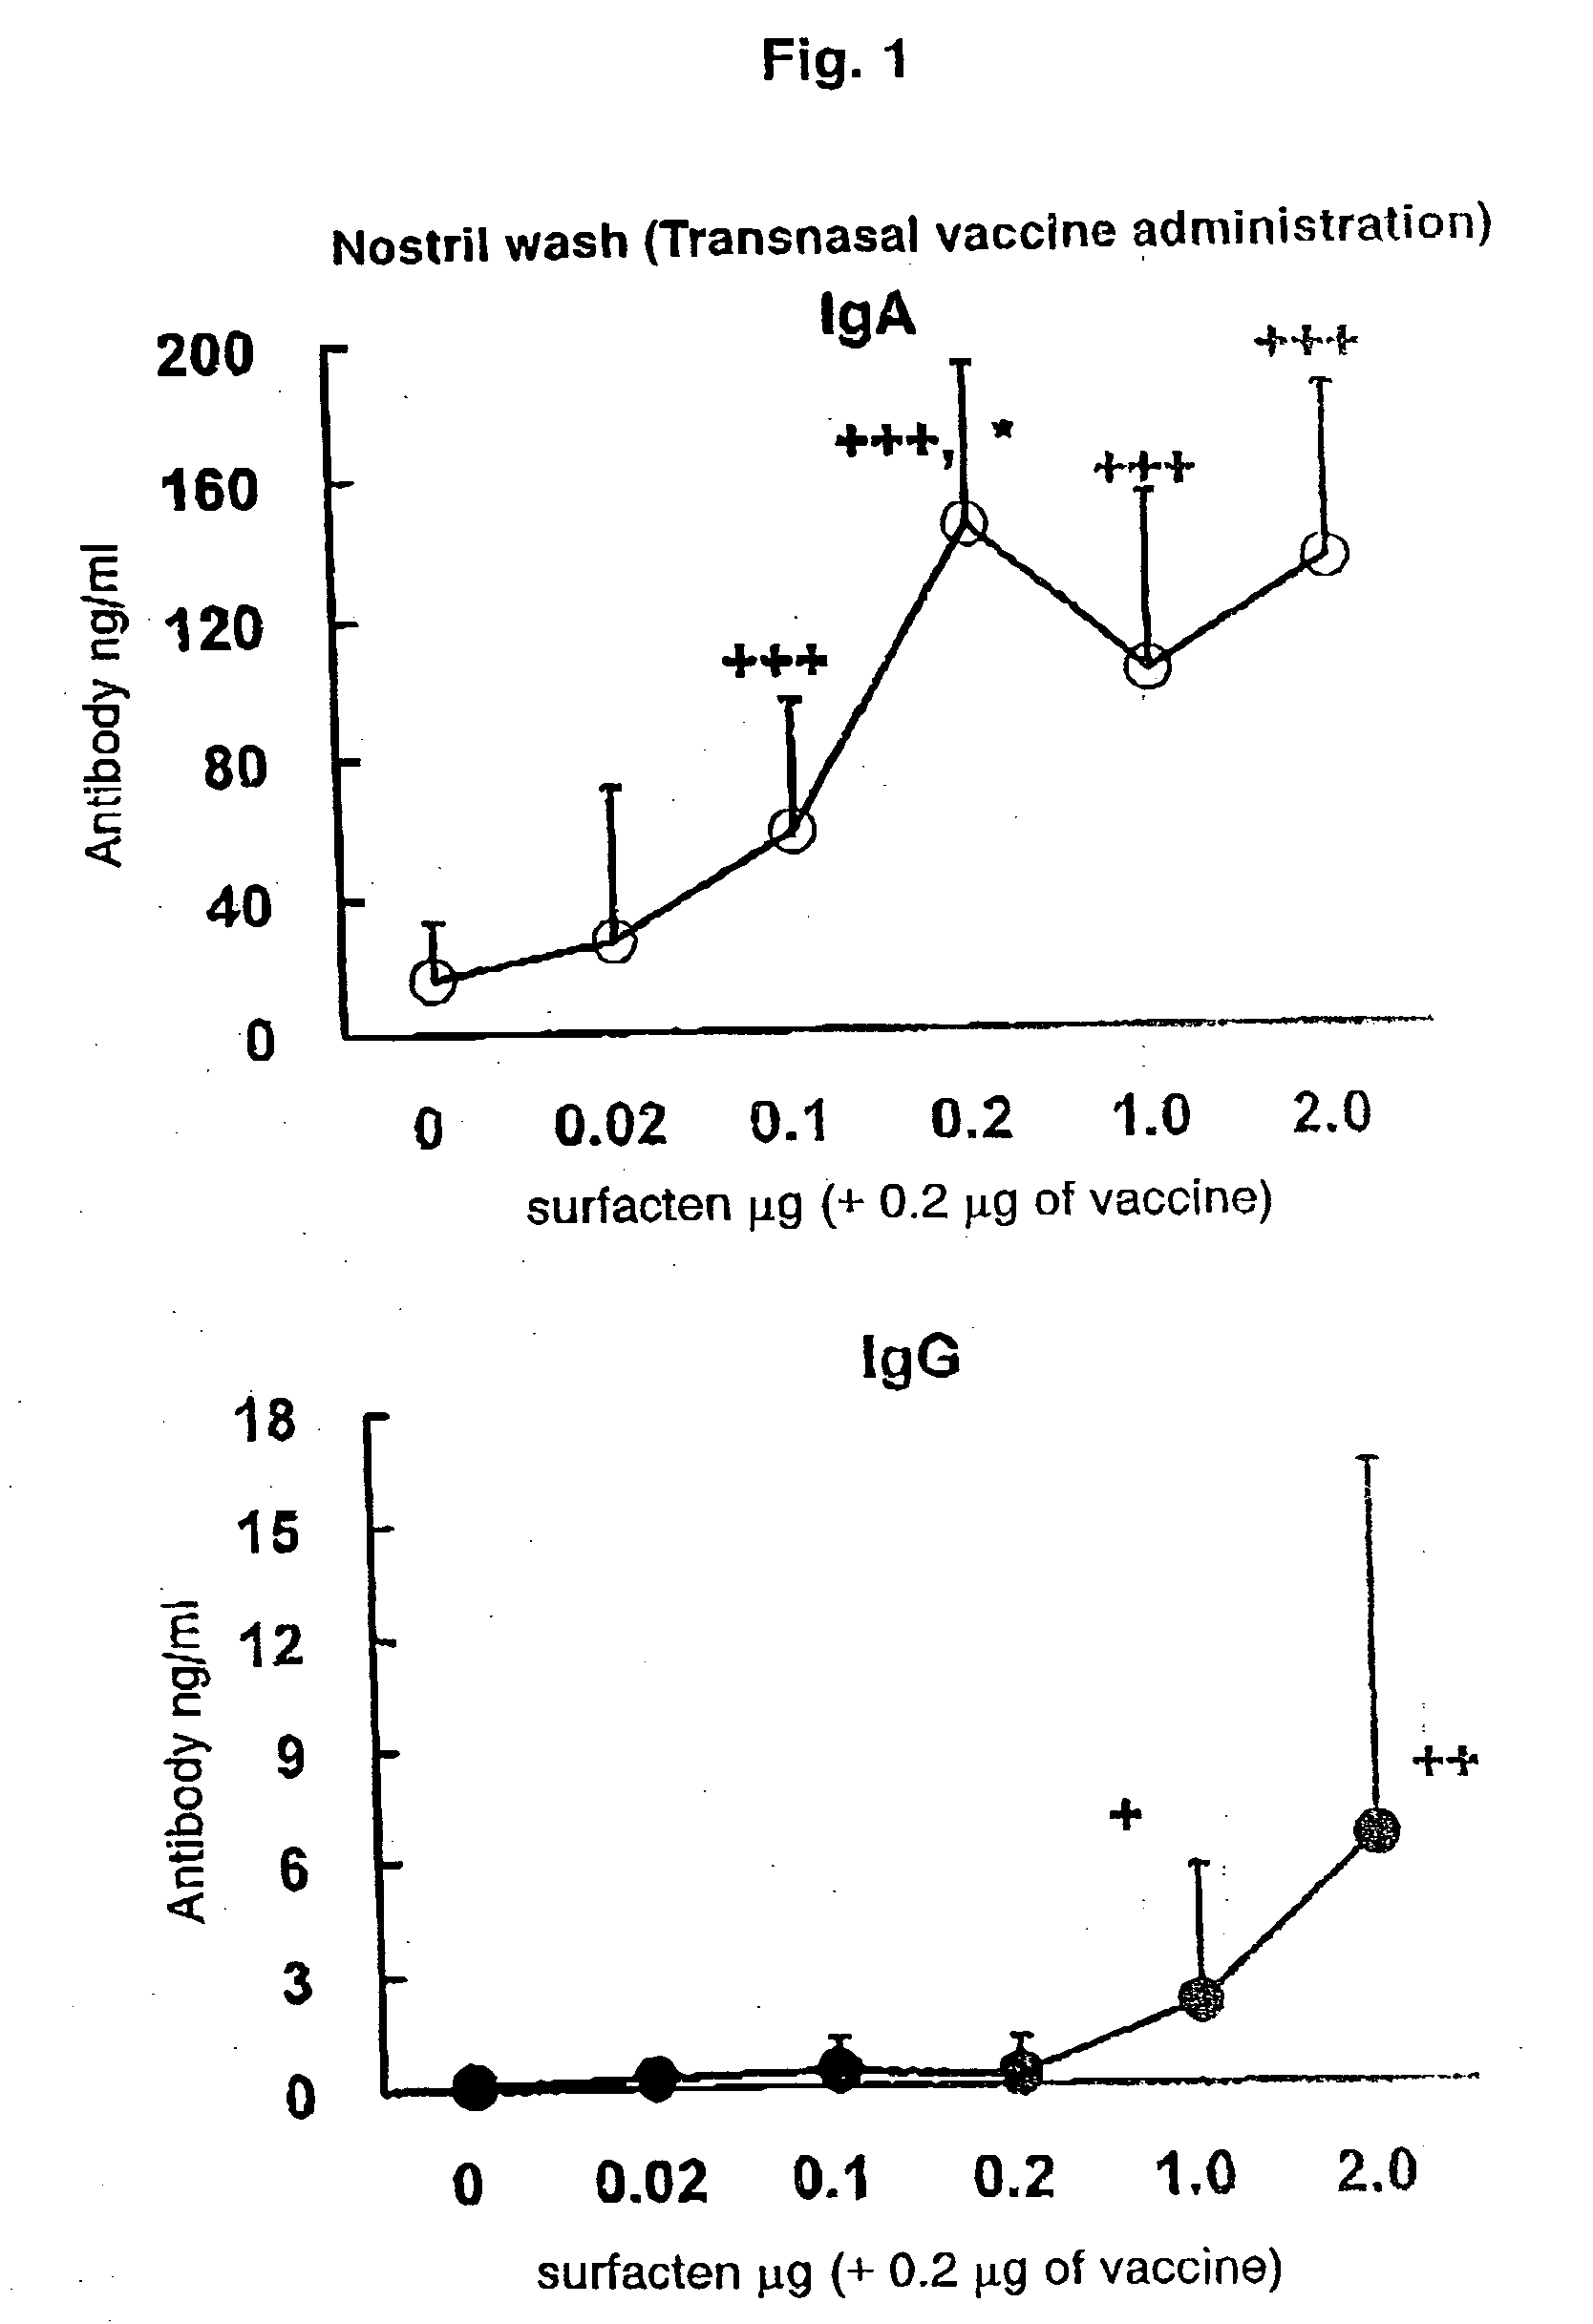 Antigen-Drug Vehicle Enabling Switch From Selective Production of IgA Antibody to Production of Both of IgA and IgG Antibodies and Transnasal/Mucosal Vaccine Using the Same